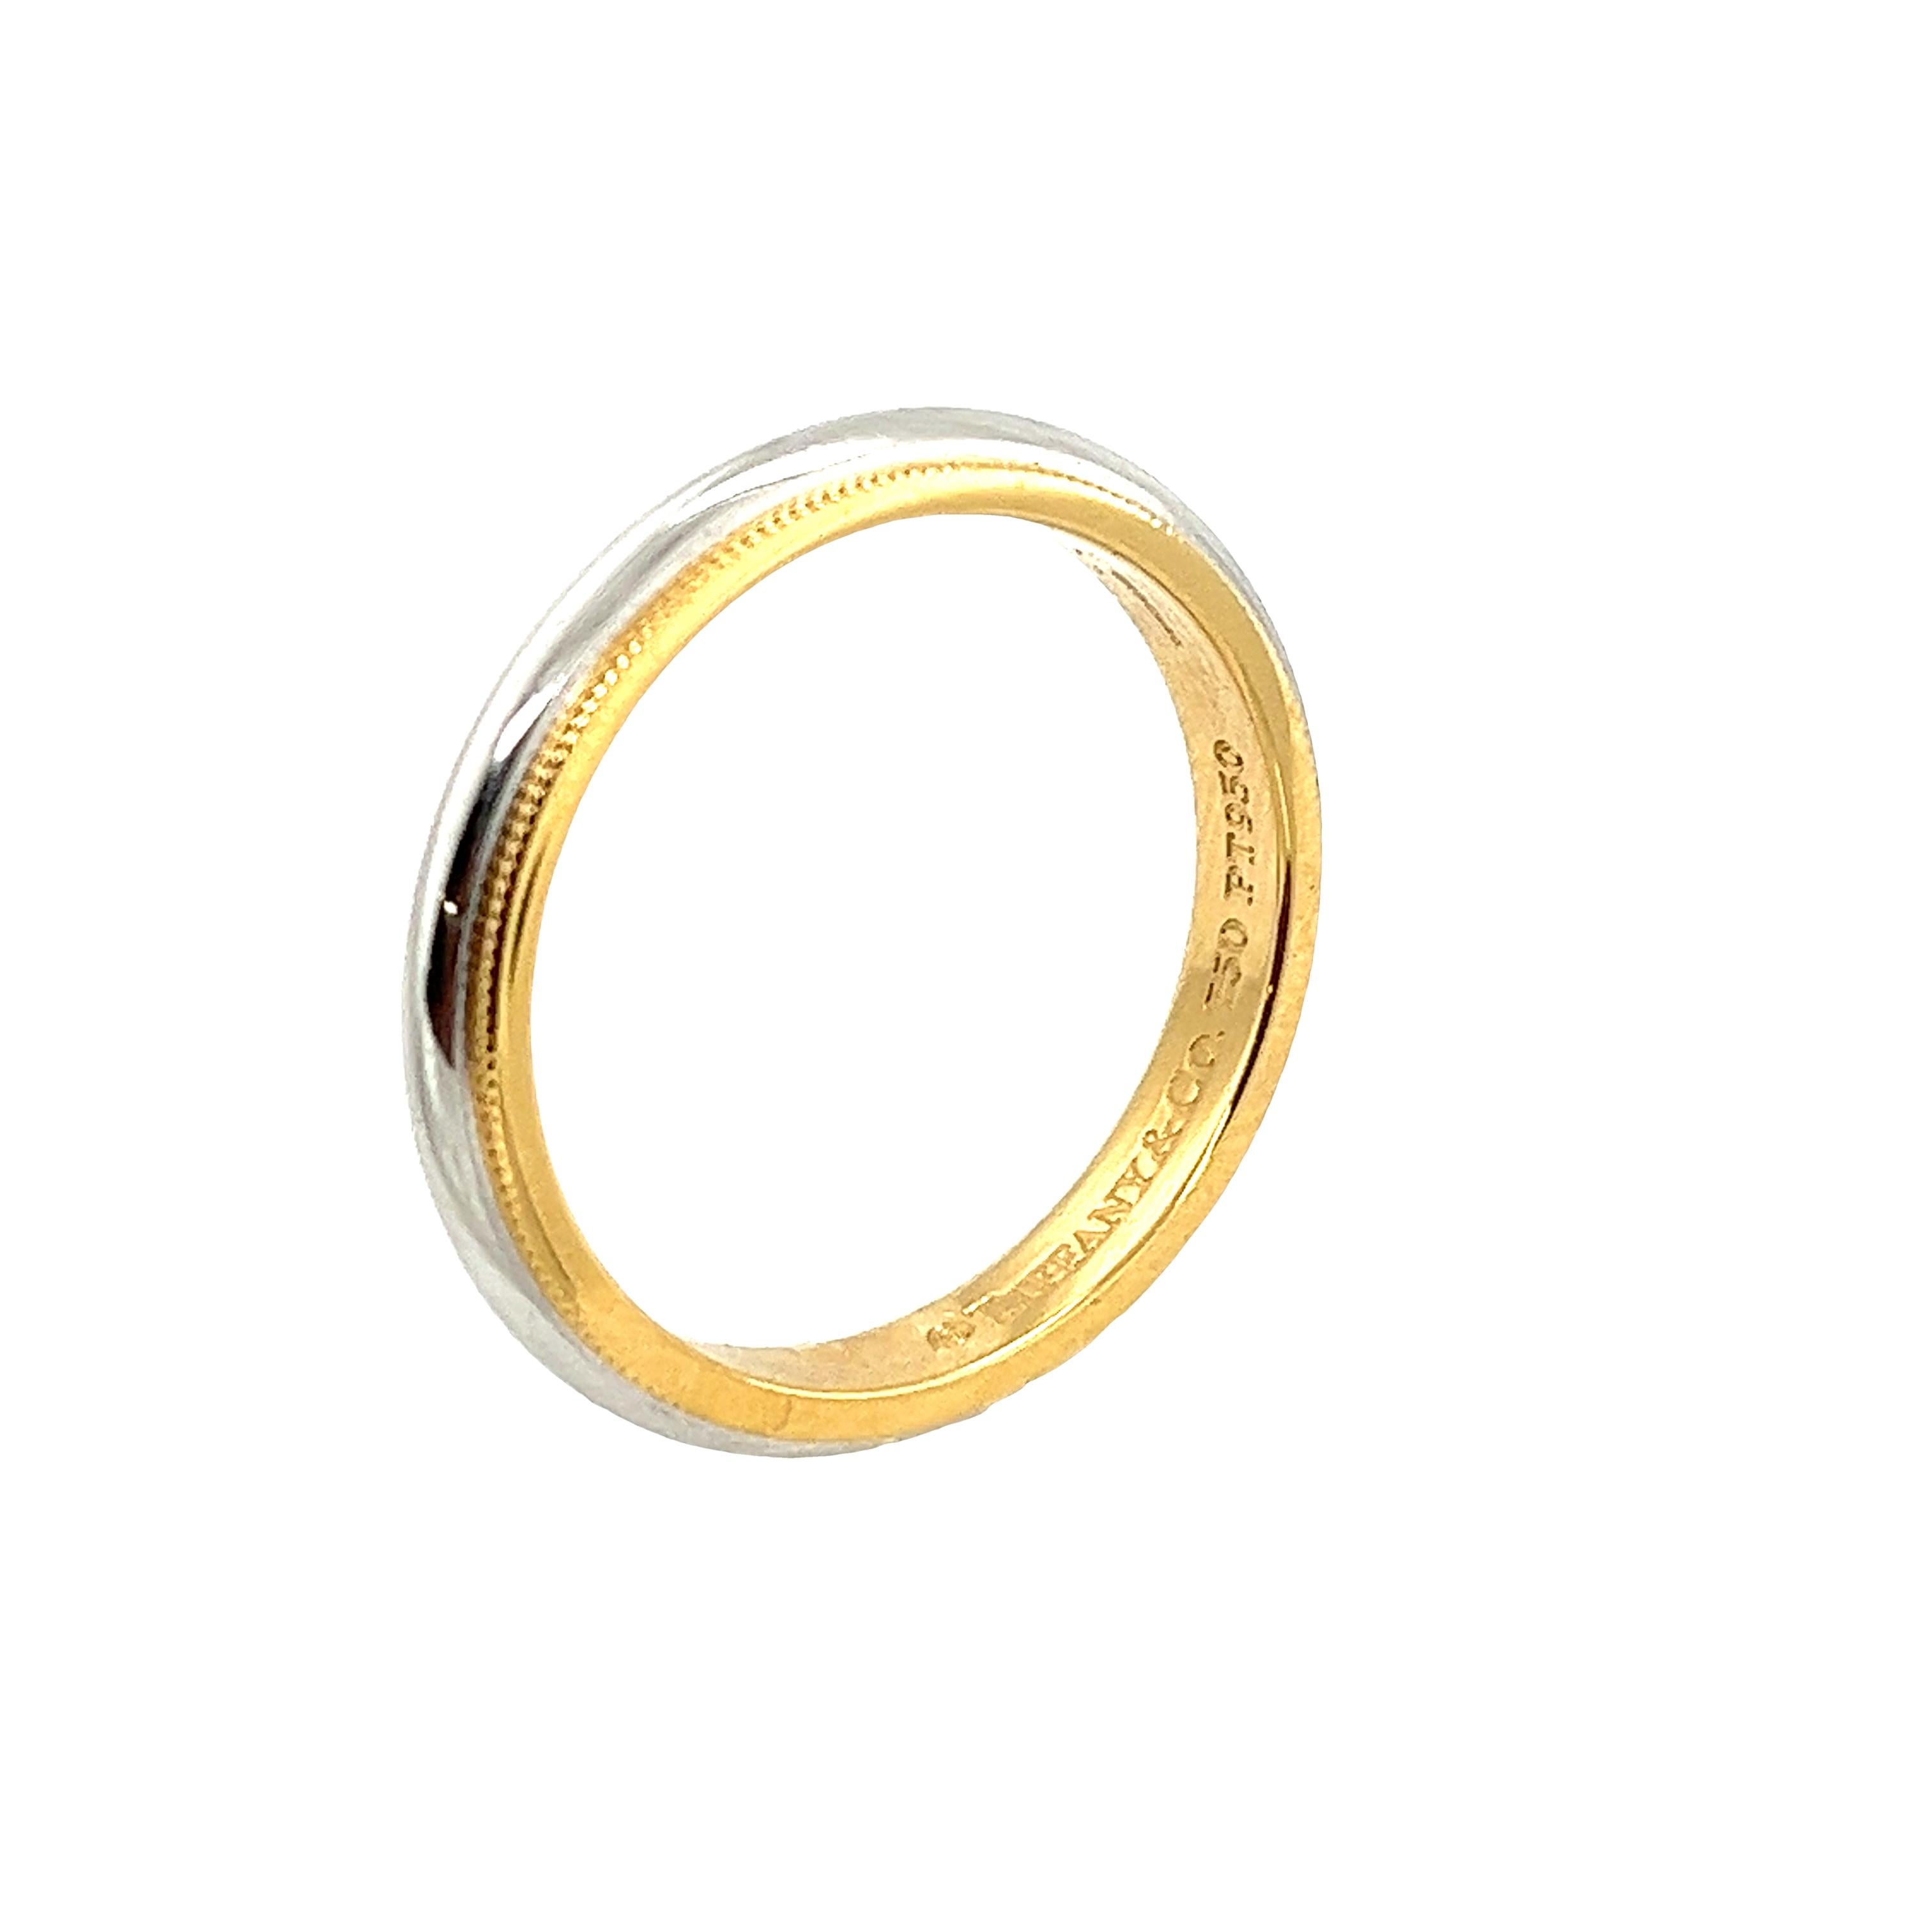 Celebrate everlasting love with the Tiffany & Co. Milgrain Two-Tone Wedding Band. Crafted from 18ct yellow gold and platinum, this 3.4mm band exudes timeless elegance. The delicate milgrain detailing adds a touch of sophistication, symbolizing the